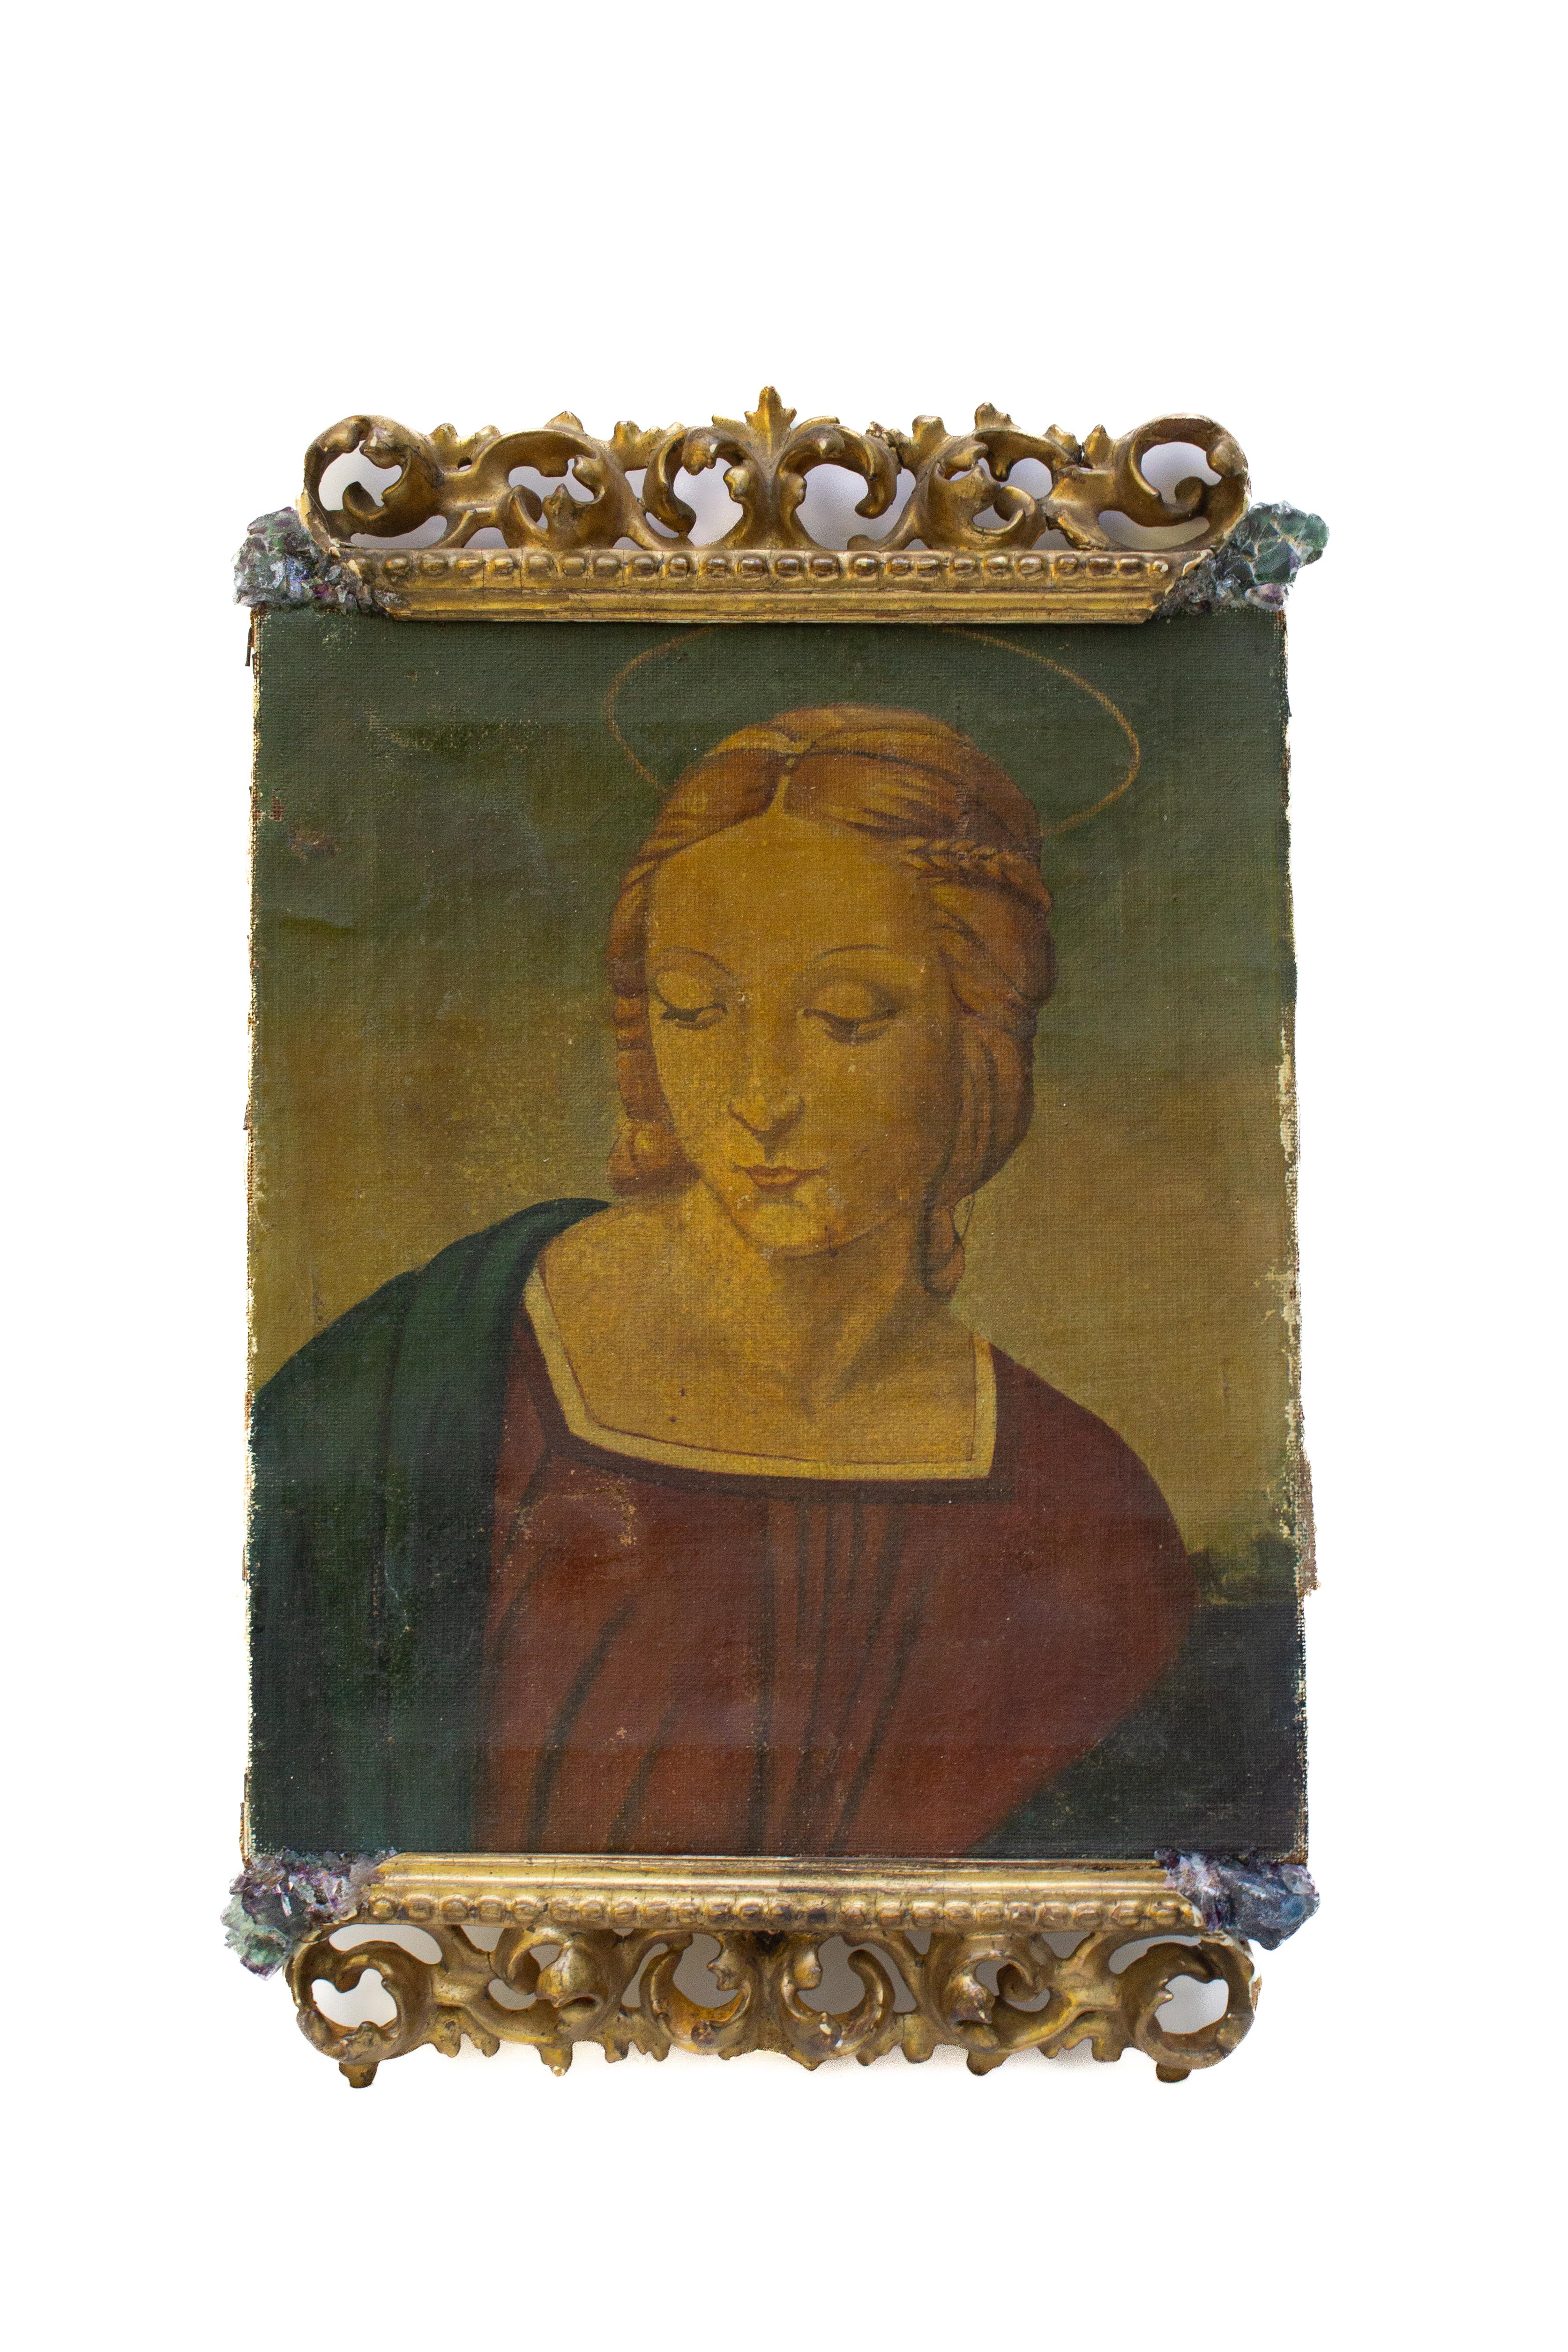 18th century Italian painting of Mary adorned with an 18th century Italian gilded fragment frame and bejeweled with green and purple fluorite.

The painting depicts Mary or possibly another saint crowned with a halo. The painting originally came